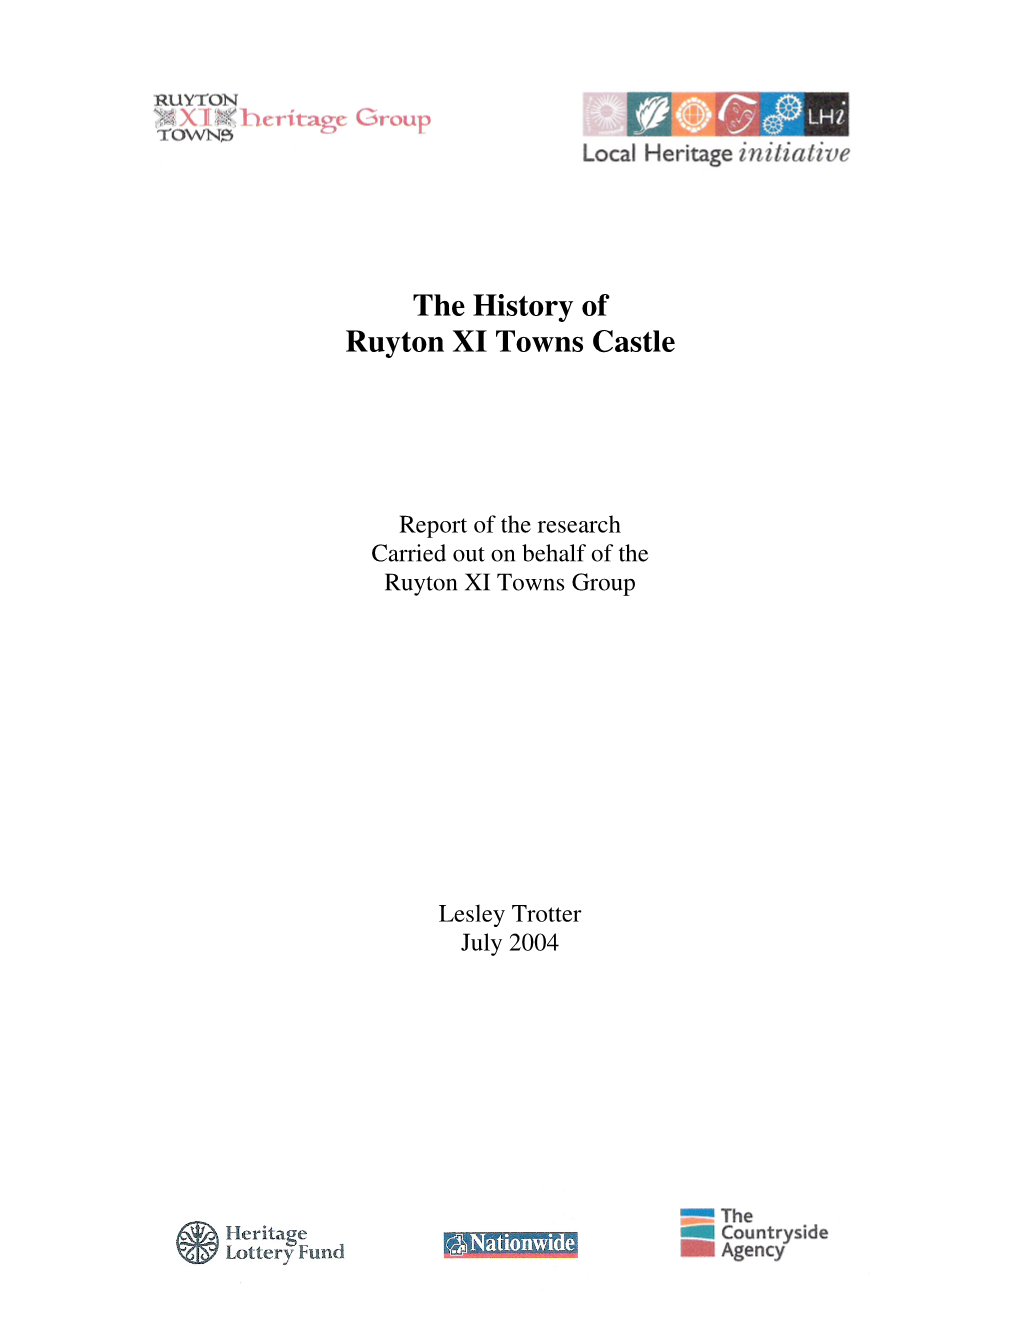 The History of Ruyton XI Towns Castle